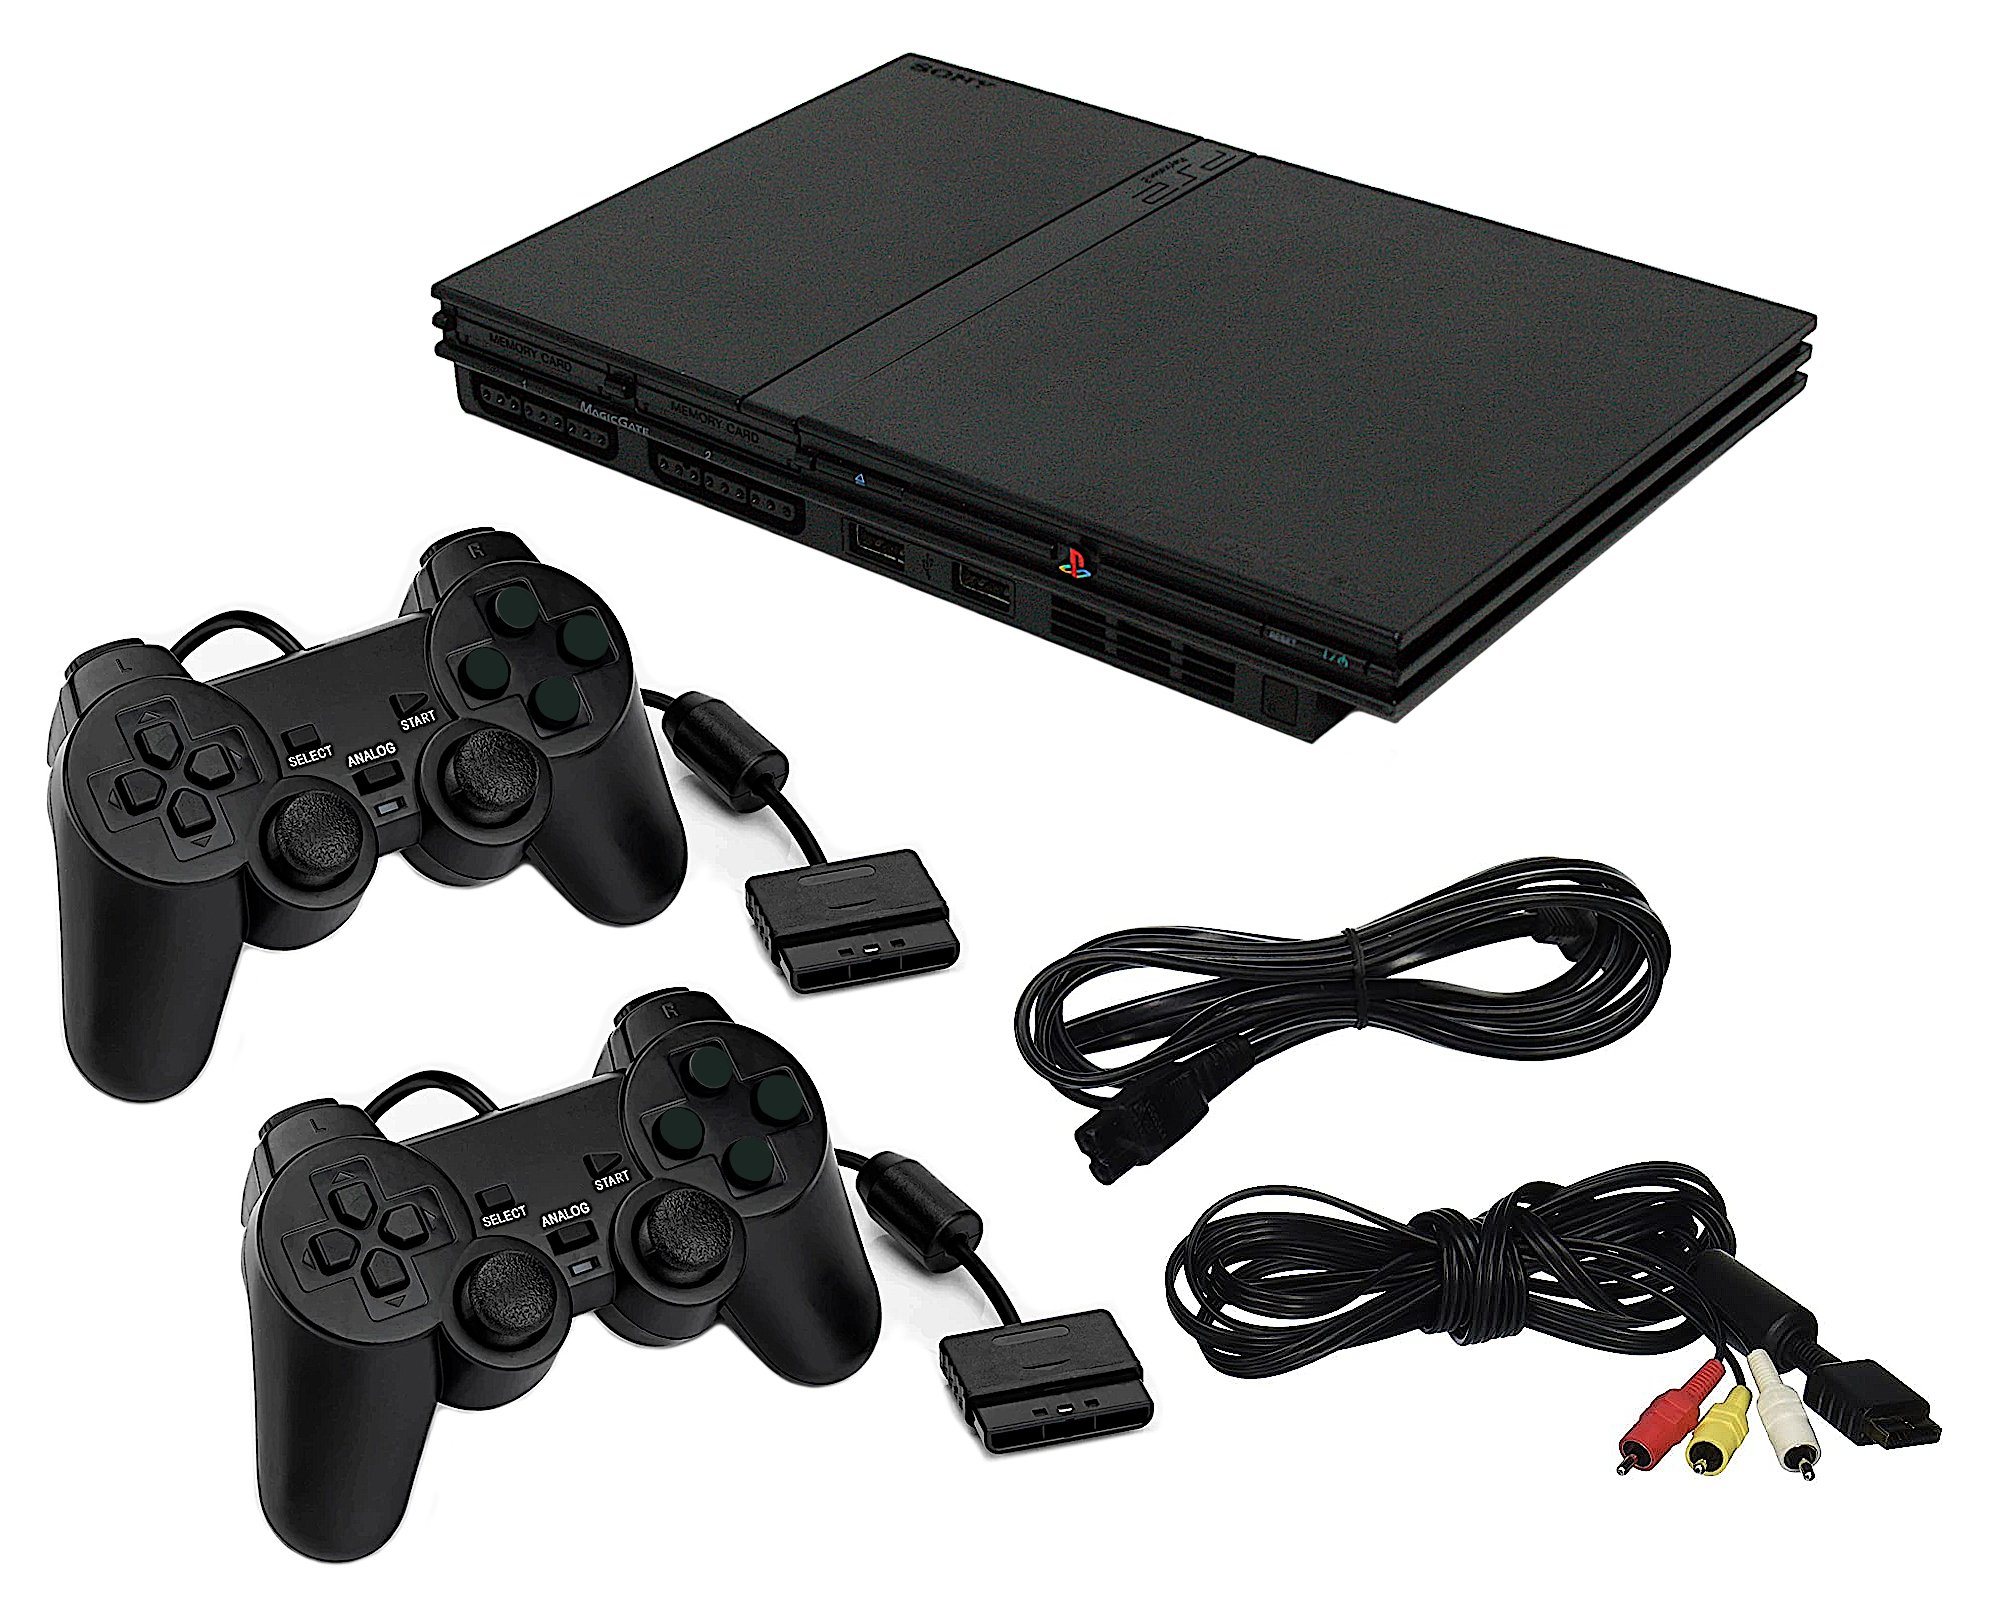 PlayStation 2 Console Slim PS2